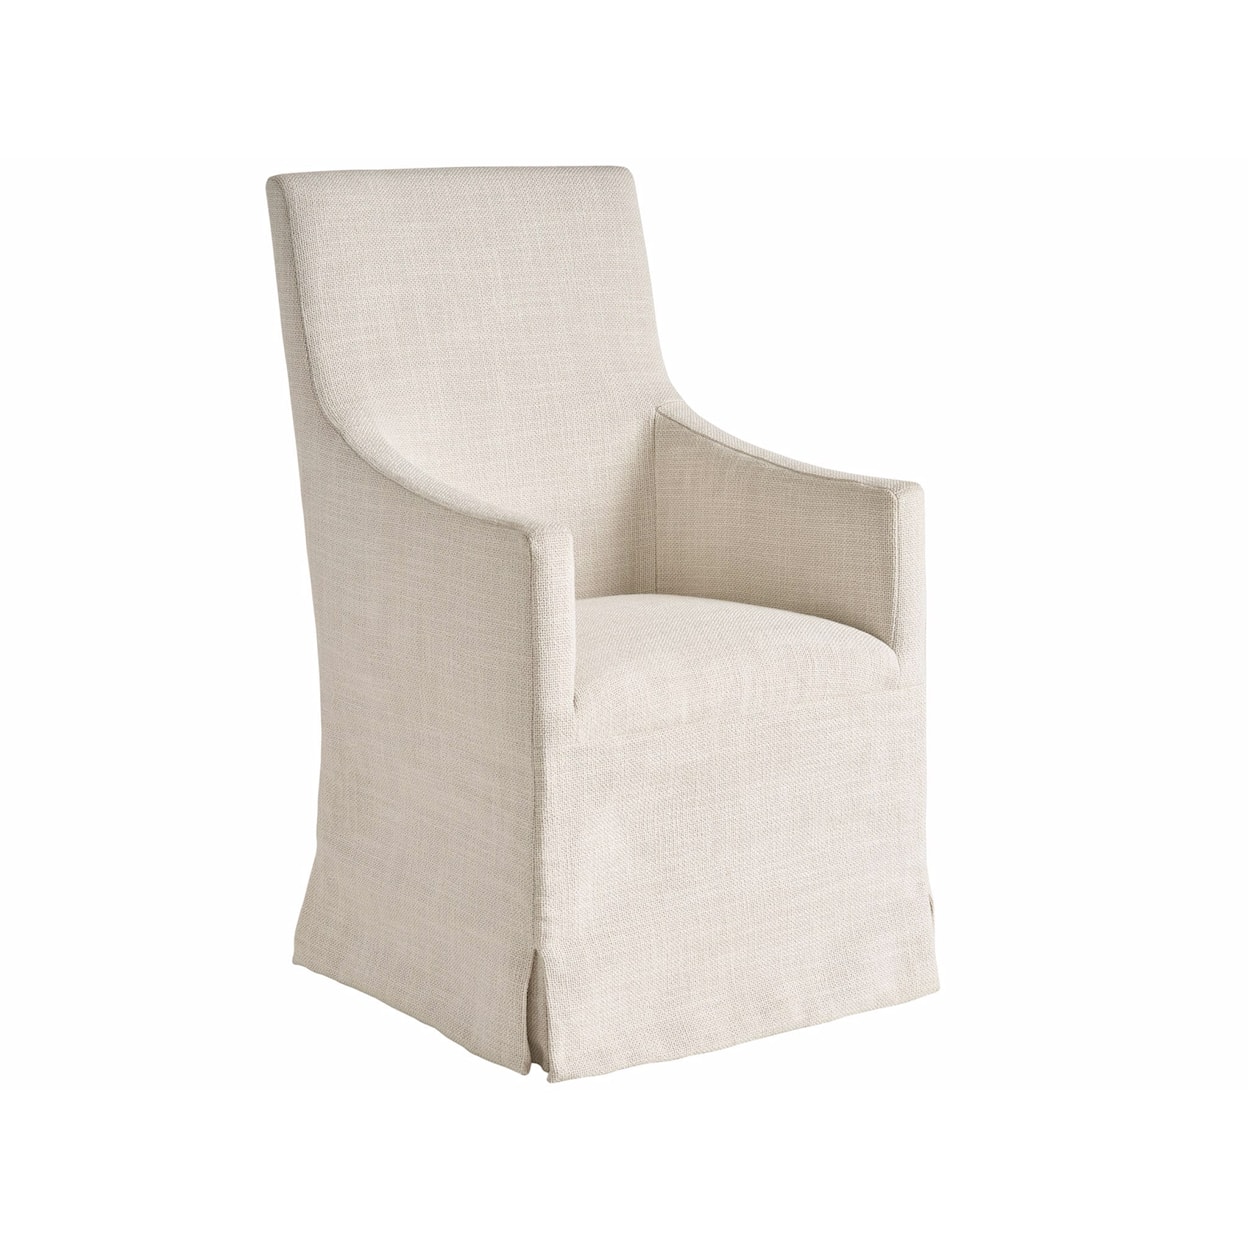 Universal COALESCE Slip Covered Dining Chair